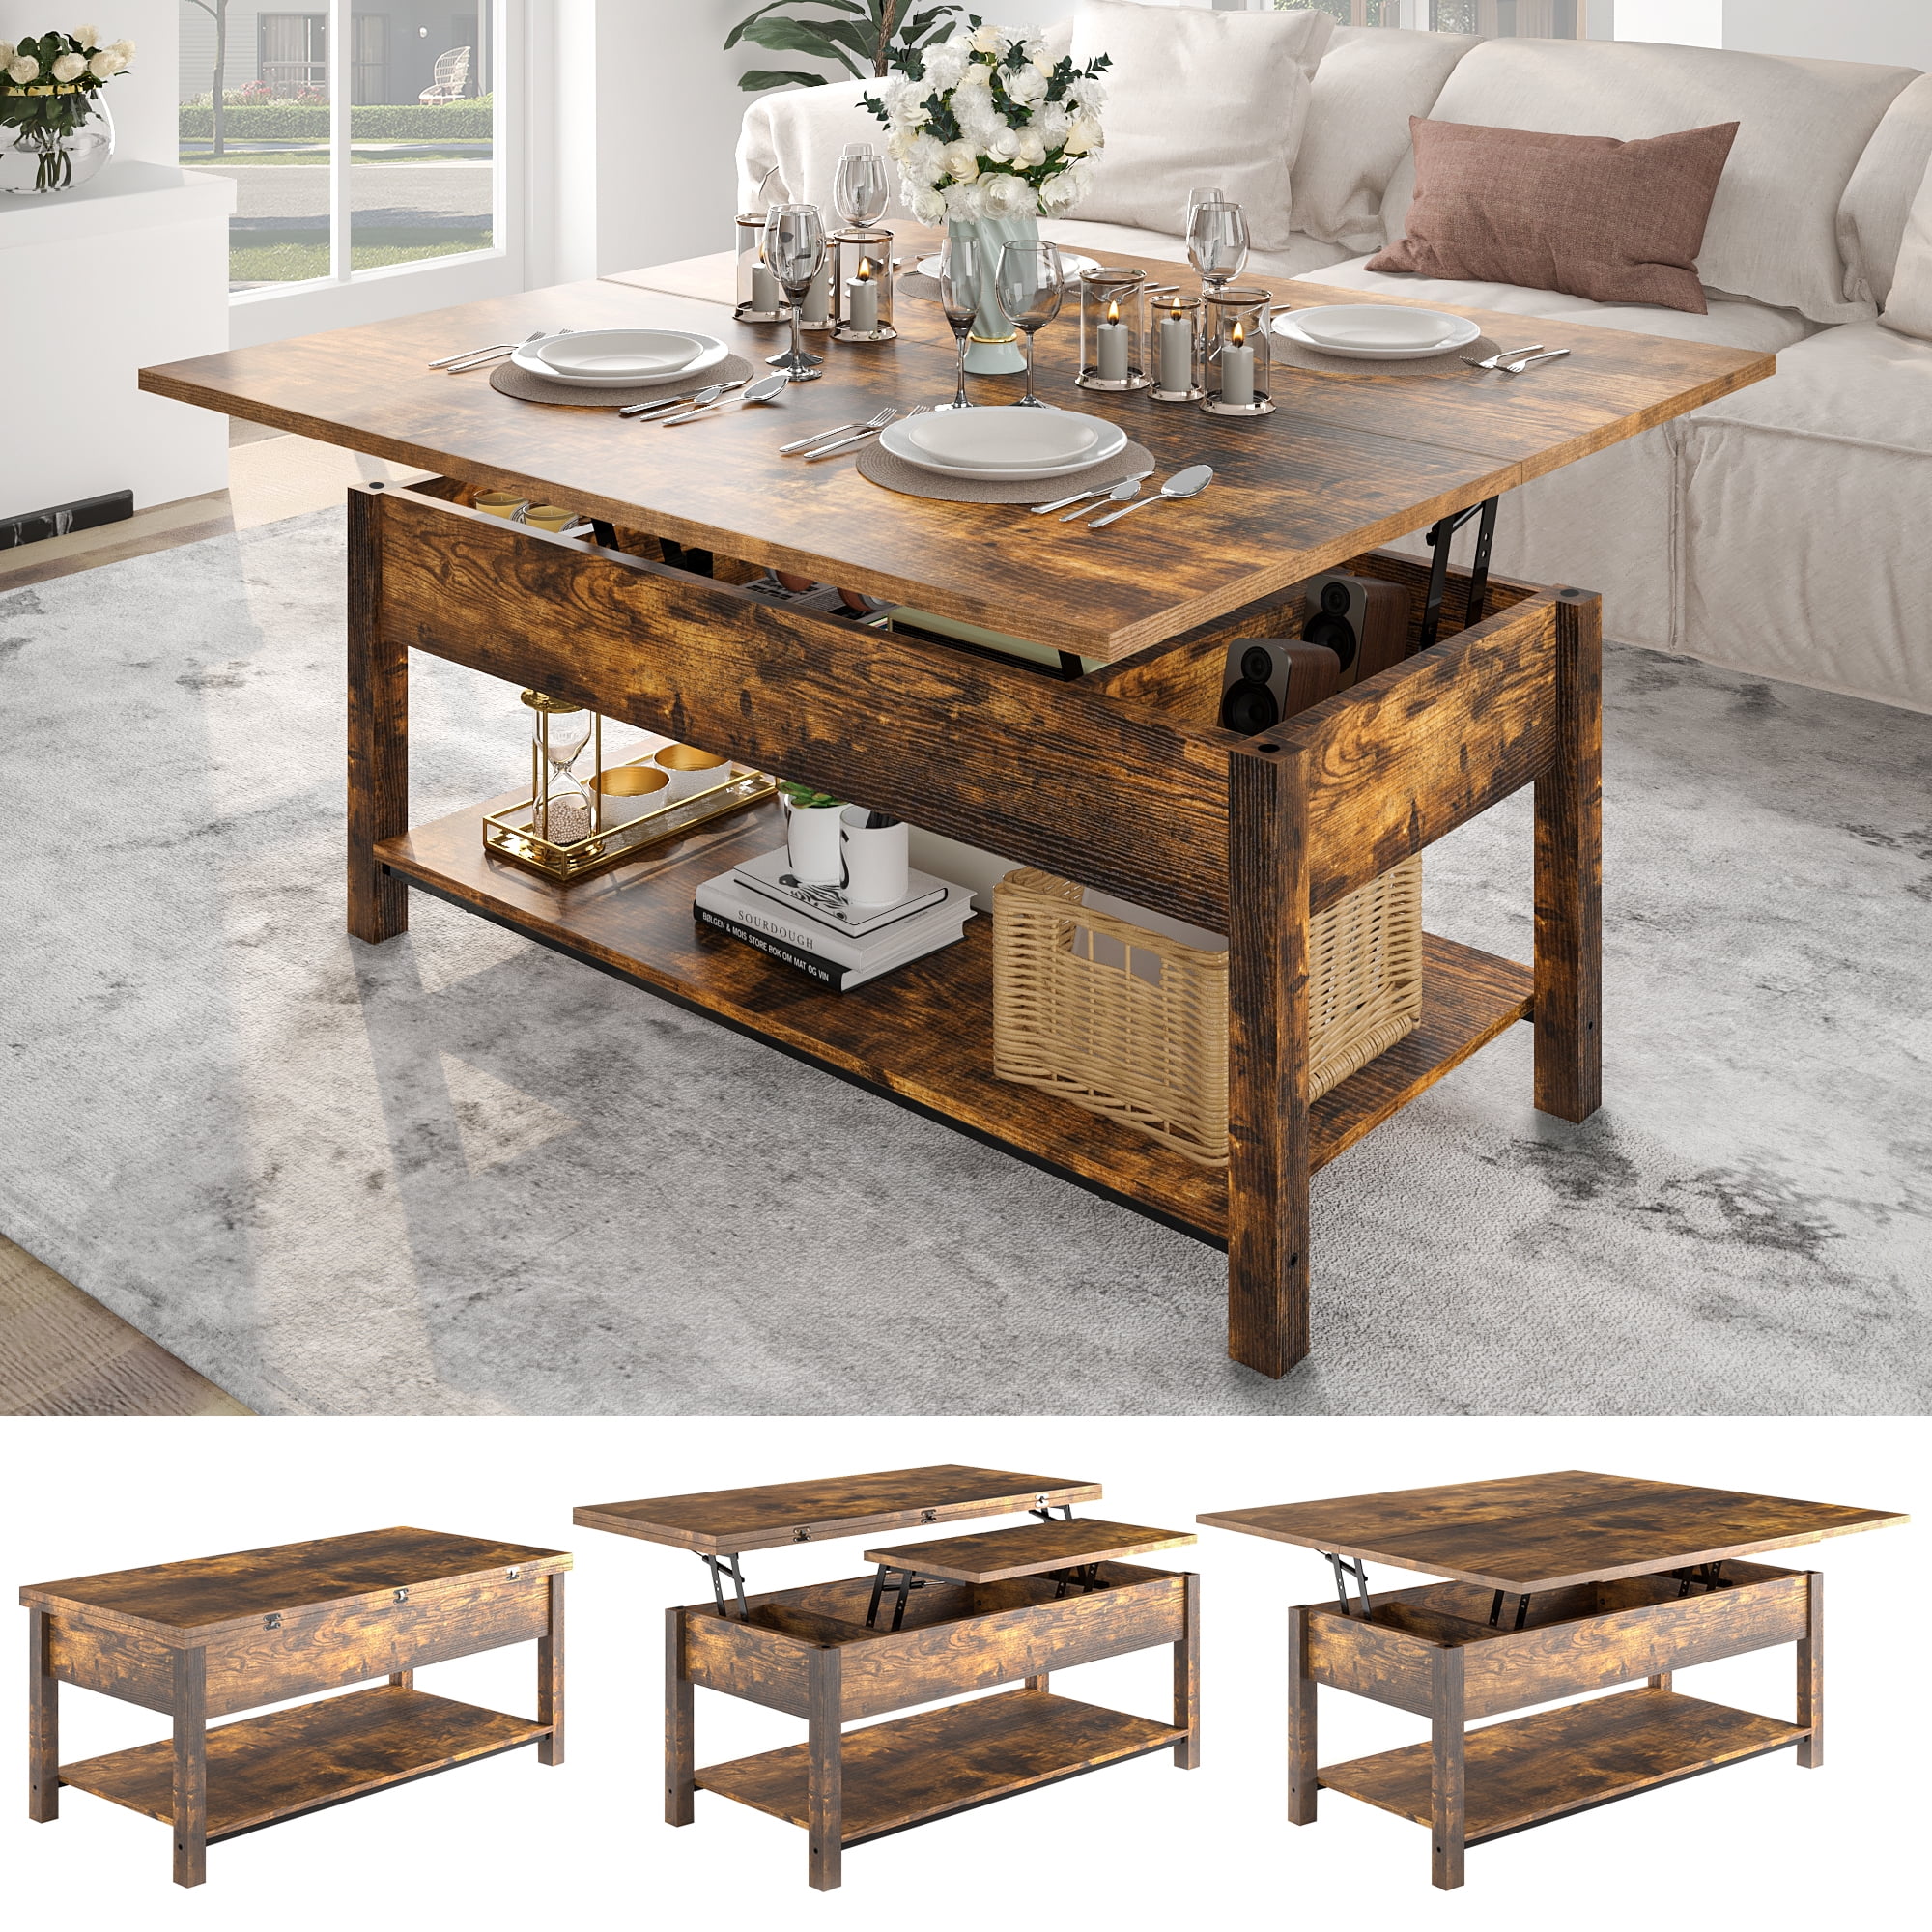 GUNAITO 41.73"Lift Top Coffee Table 4 in 1 Multi-Function Convertible Coffee Table with Hidden Storage Framhouse Coffee Table for Living Room Rustic Brown - image 1 of 8